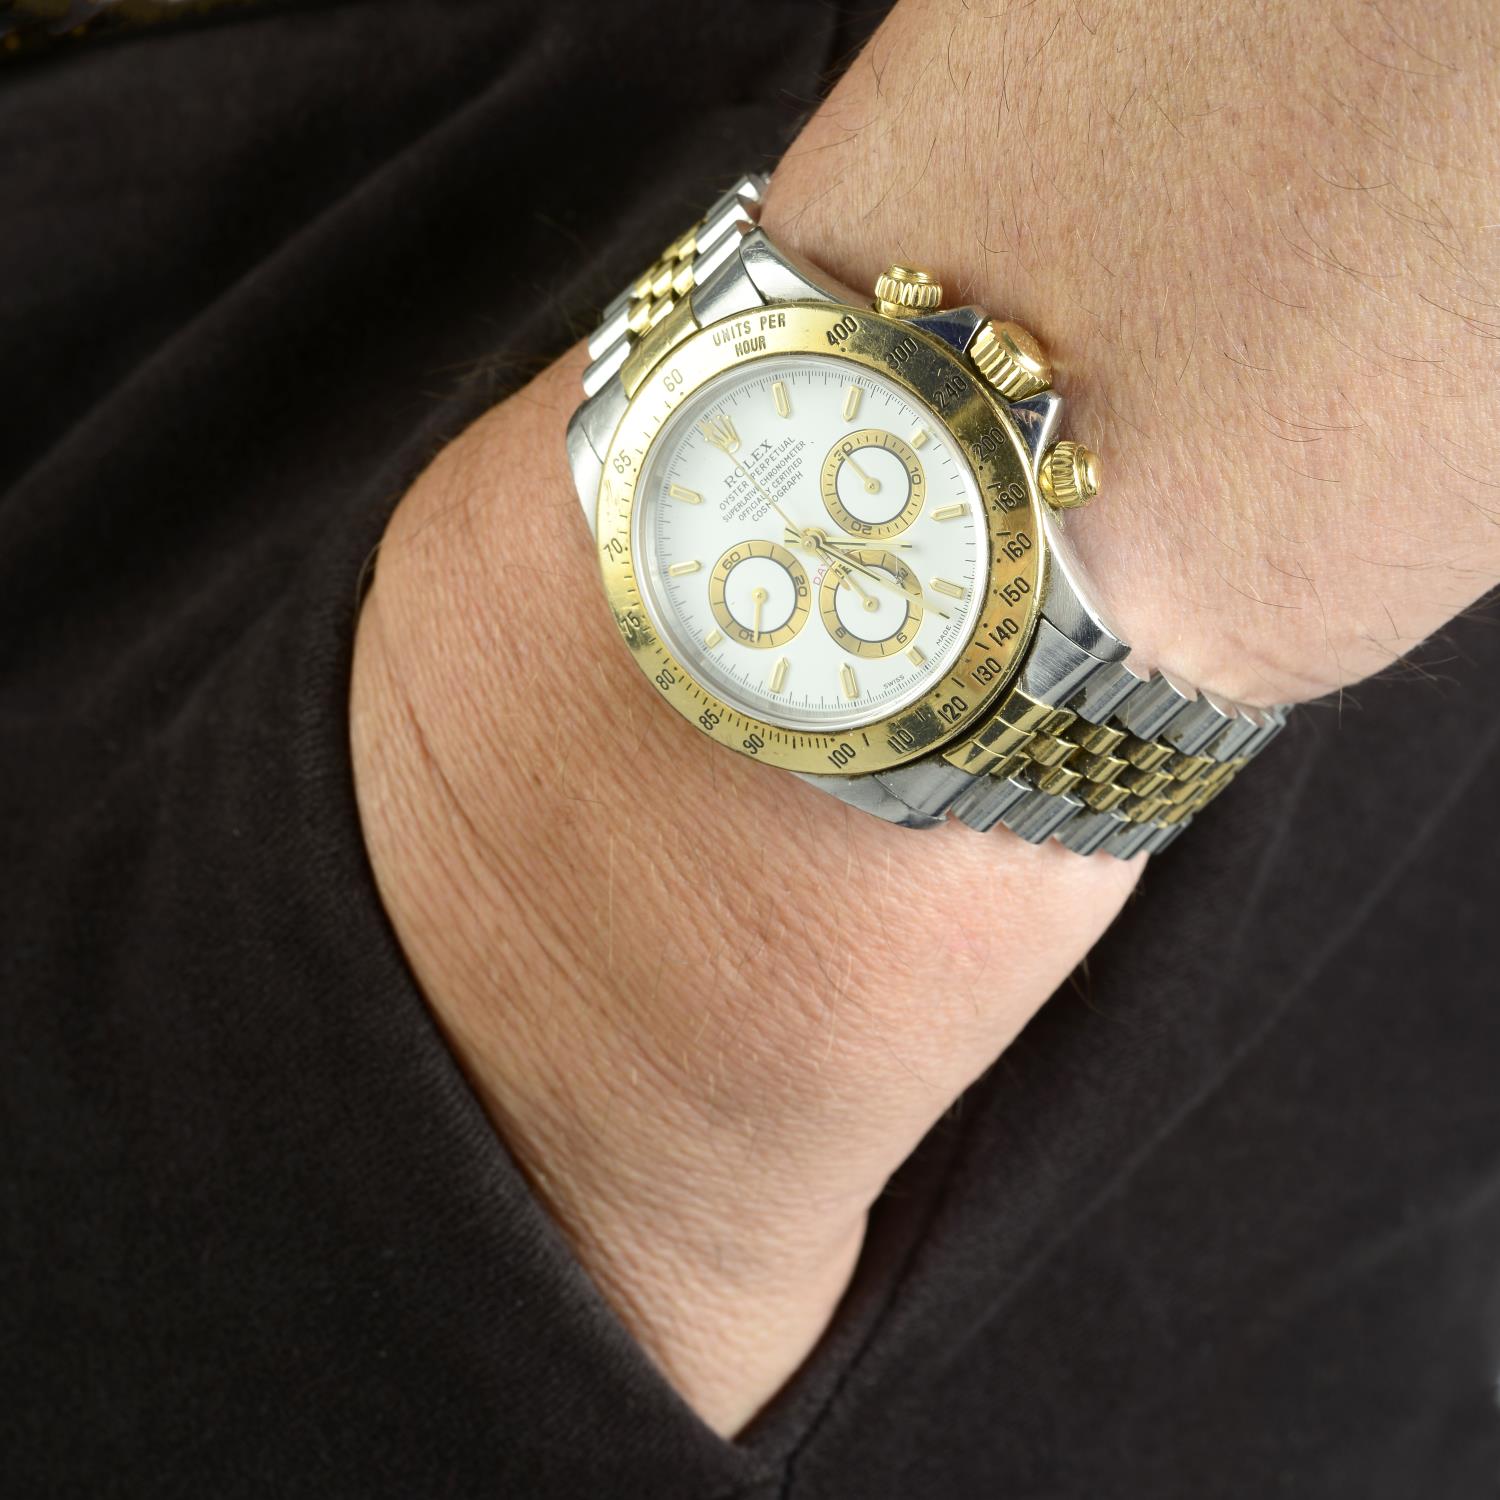 ROLEX - a gentleman's Oyster Perpetual Cosmograph Daytona chronograph bracelet watch. - Image 3 of 4